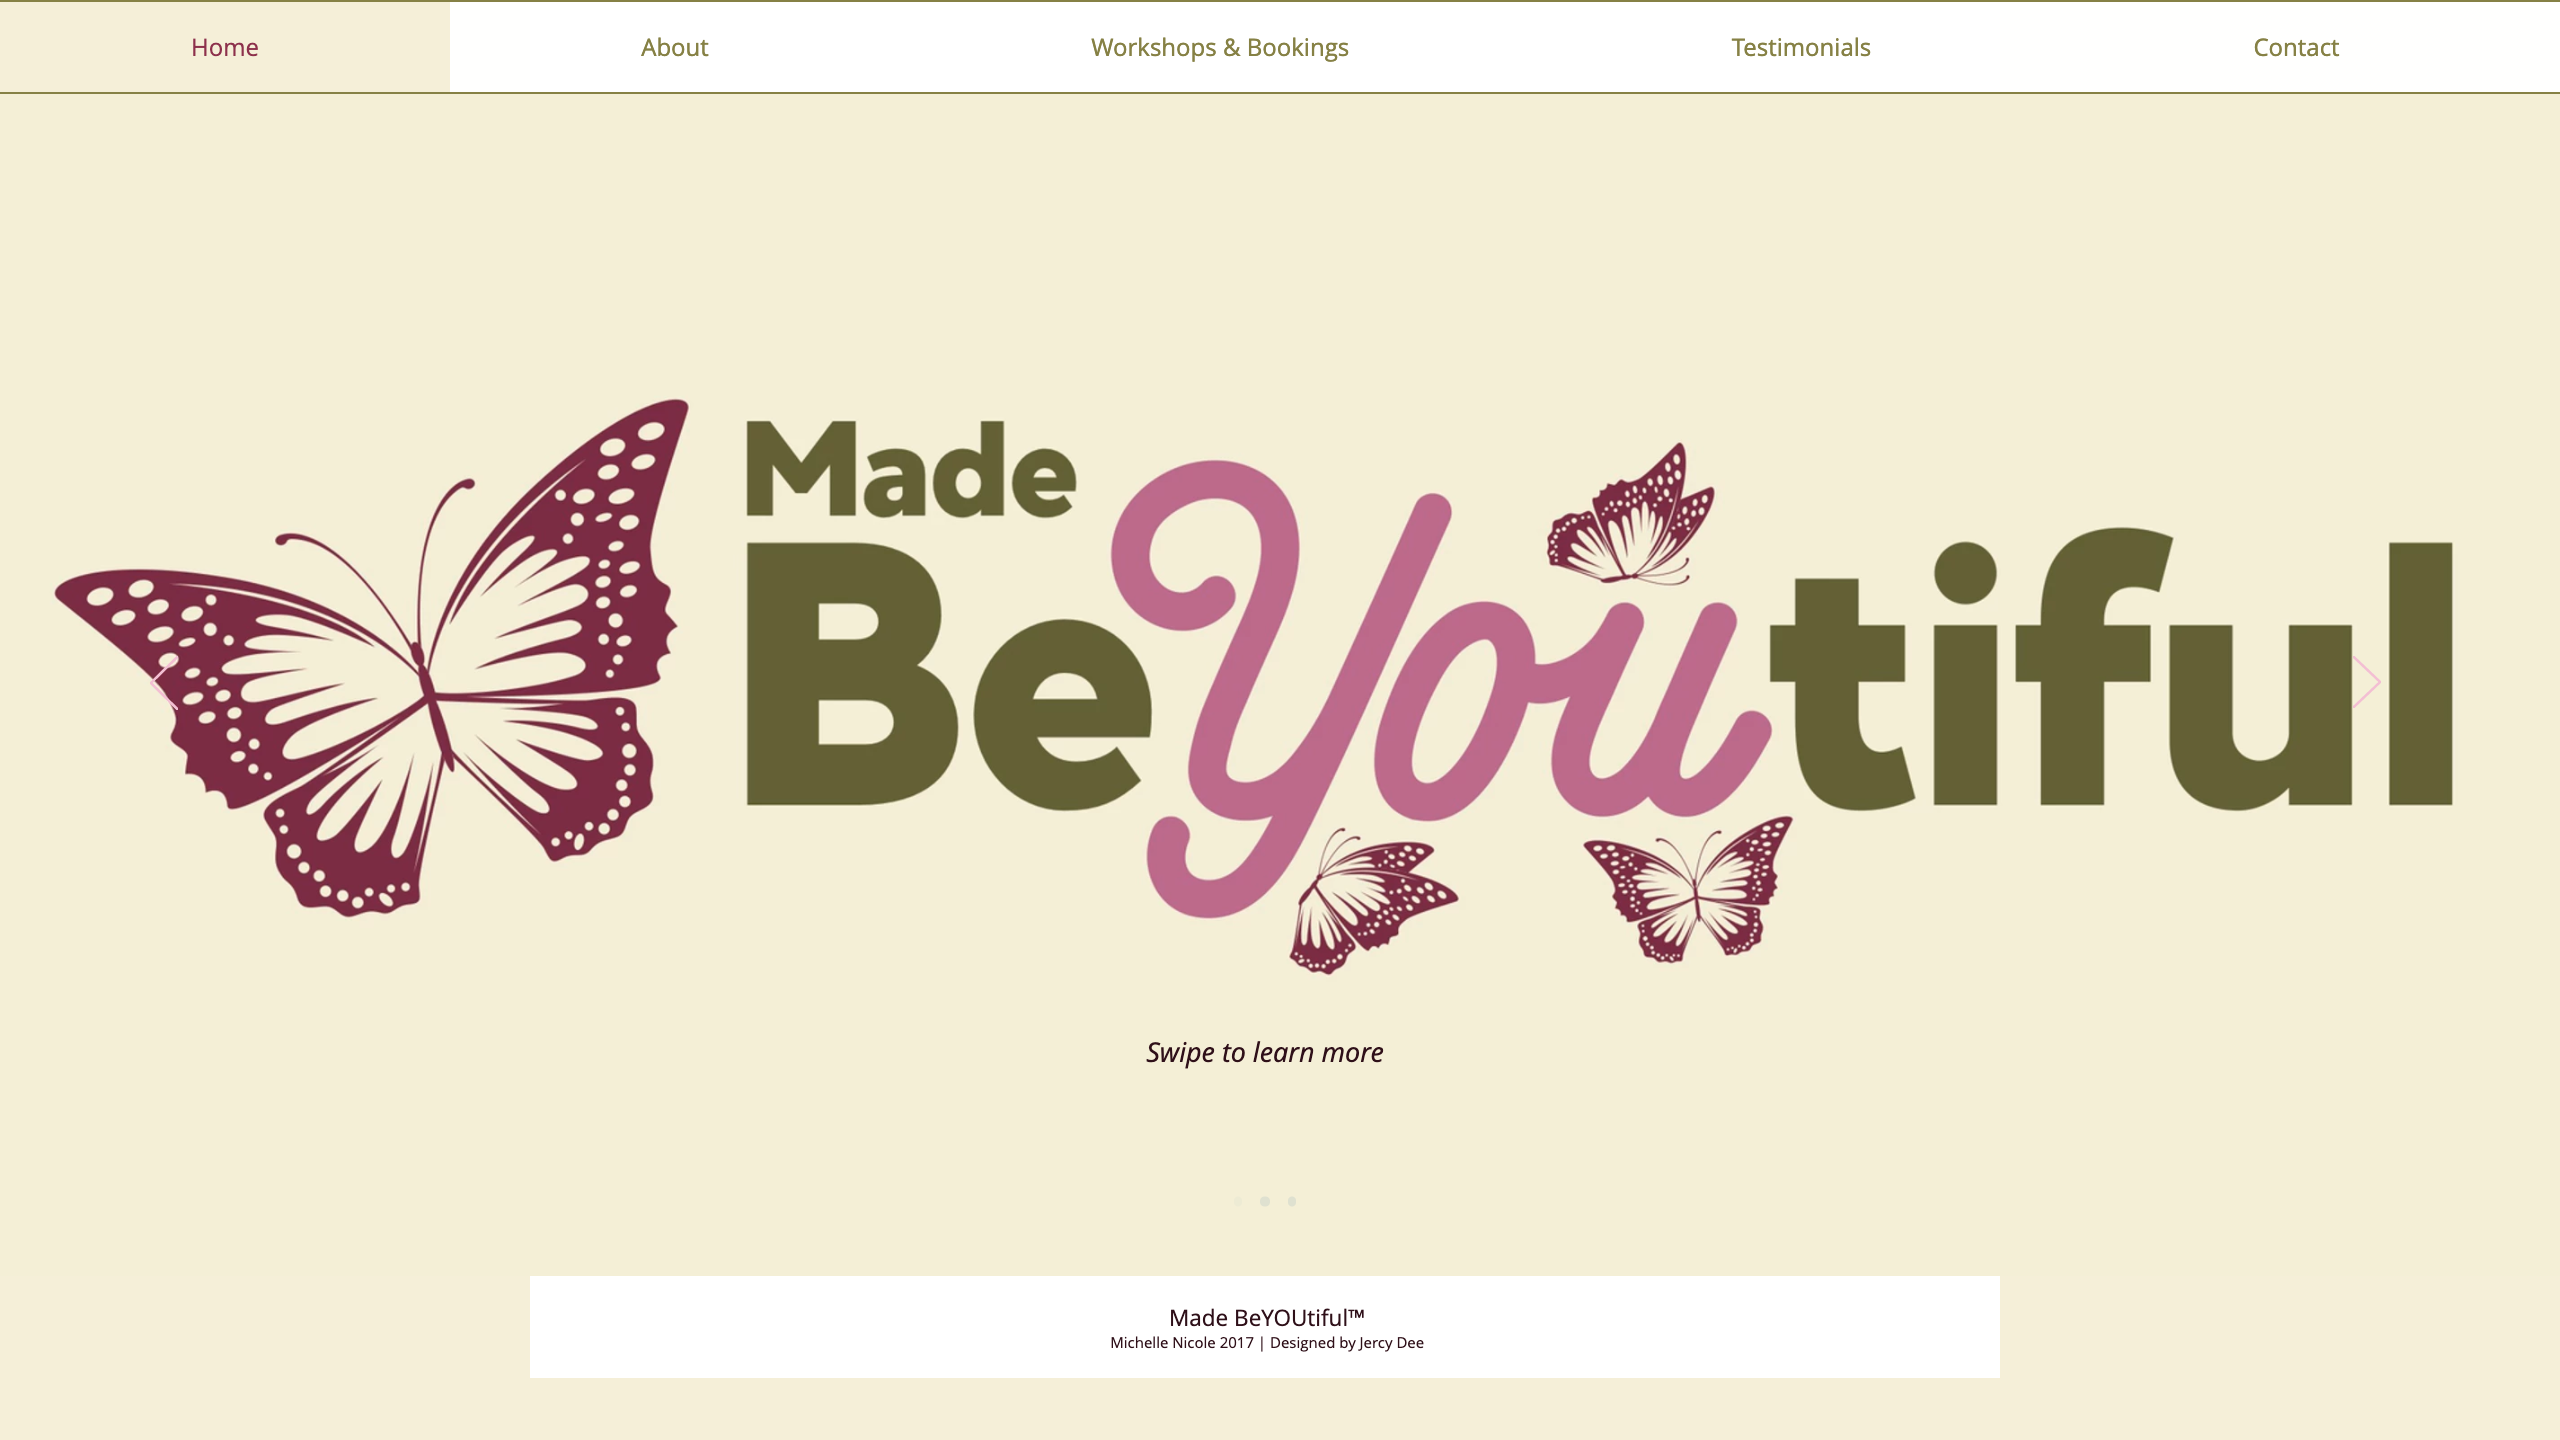 The homepage for the Made BeYOUtiful website.